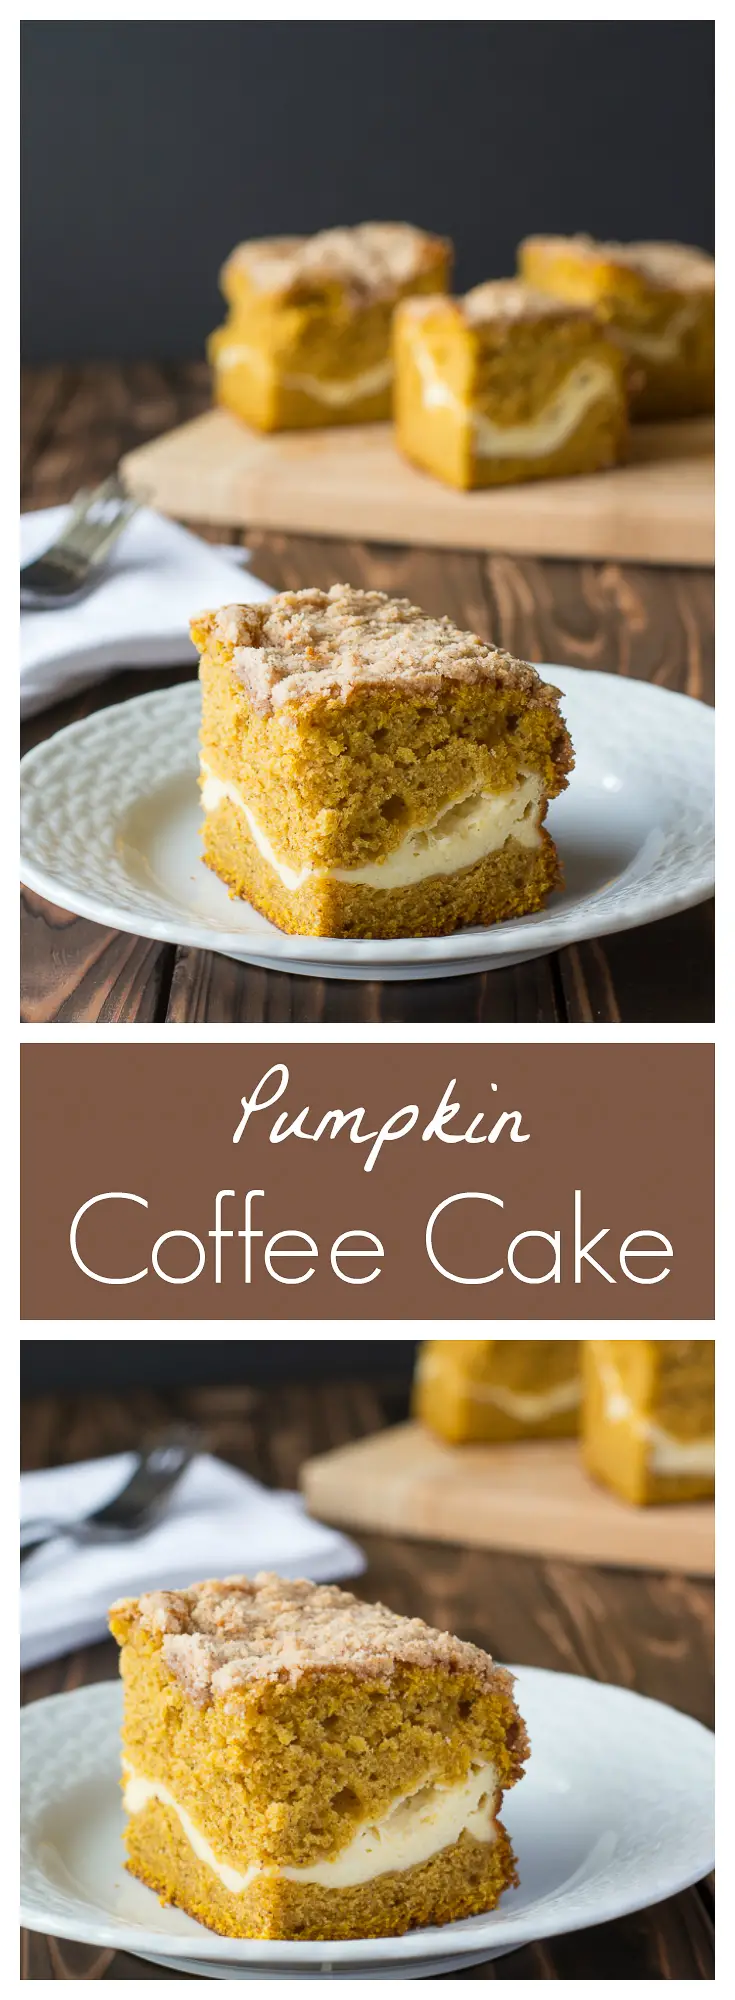 Pumpkin Coffee Cake layered with cream cheese and crispy streusel topping! | Kitchen Gidget